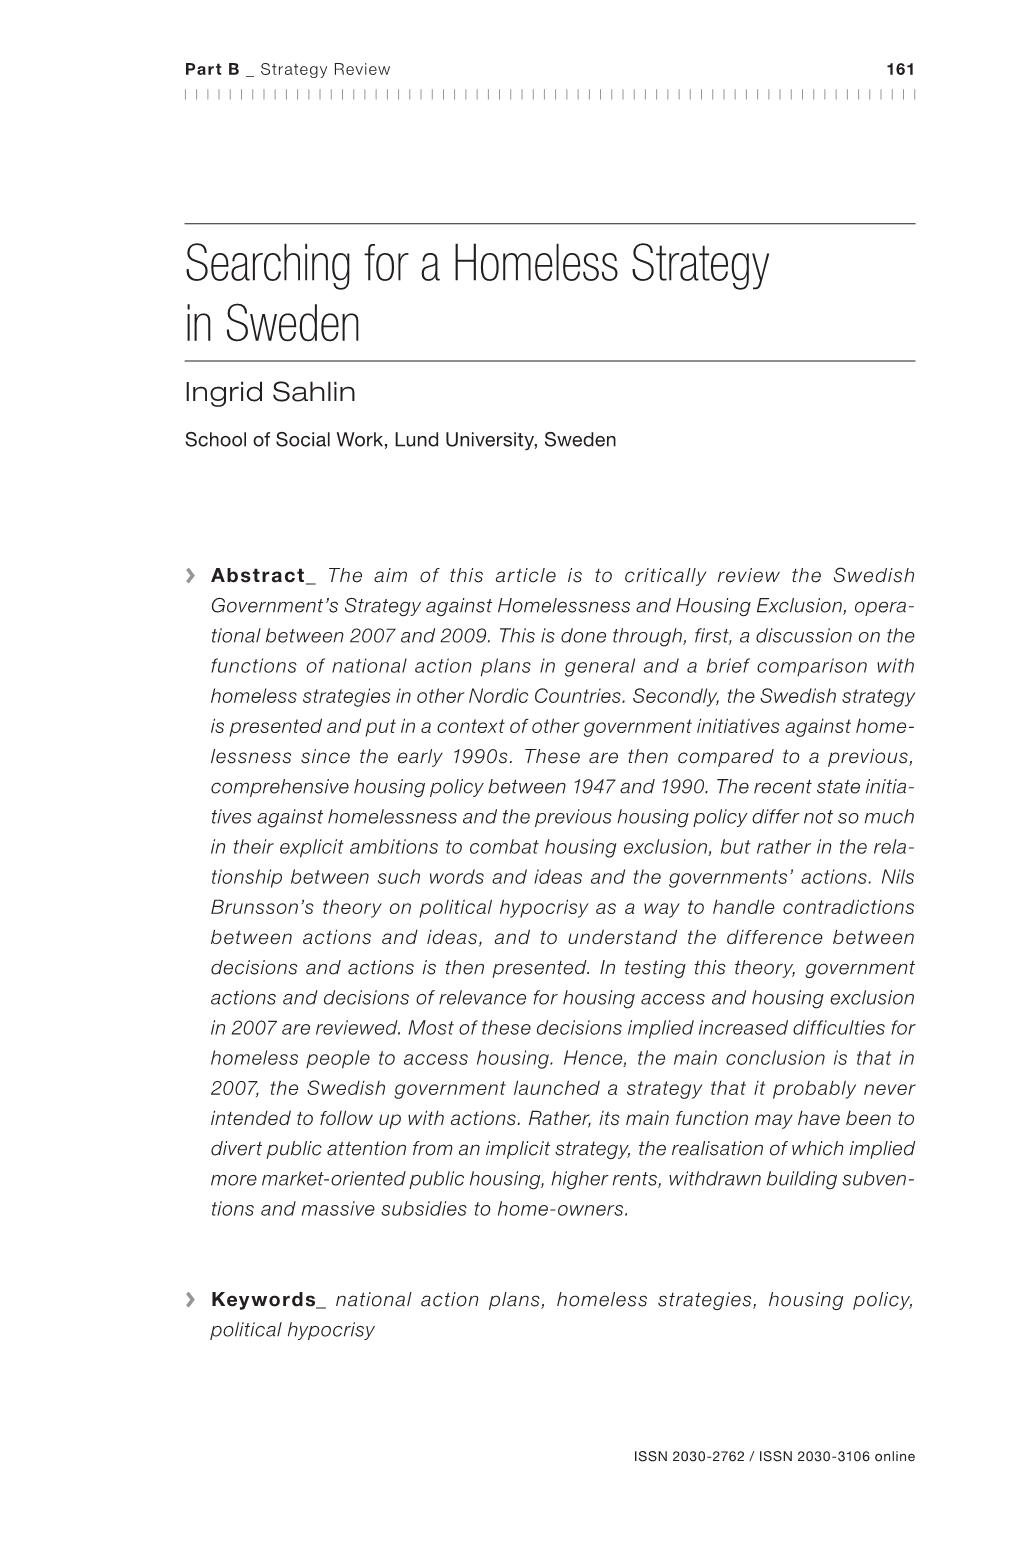 Searching for a Homeless Strategy in Sweden Ingrid Sahlin